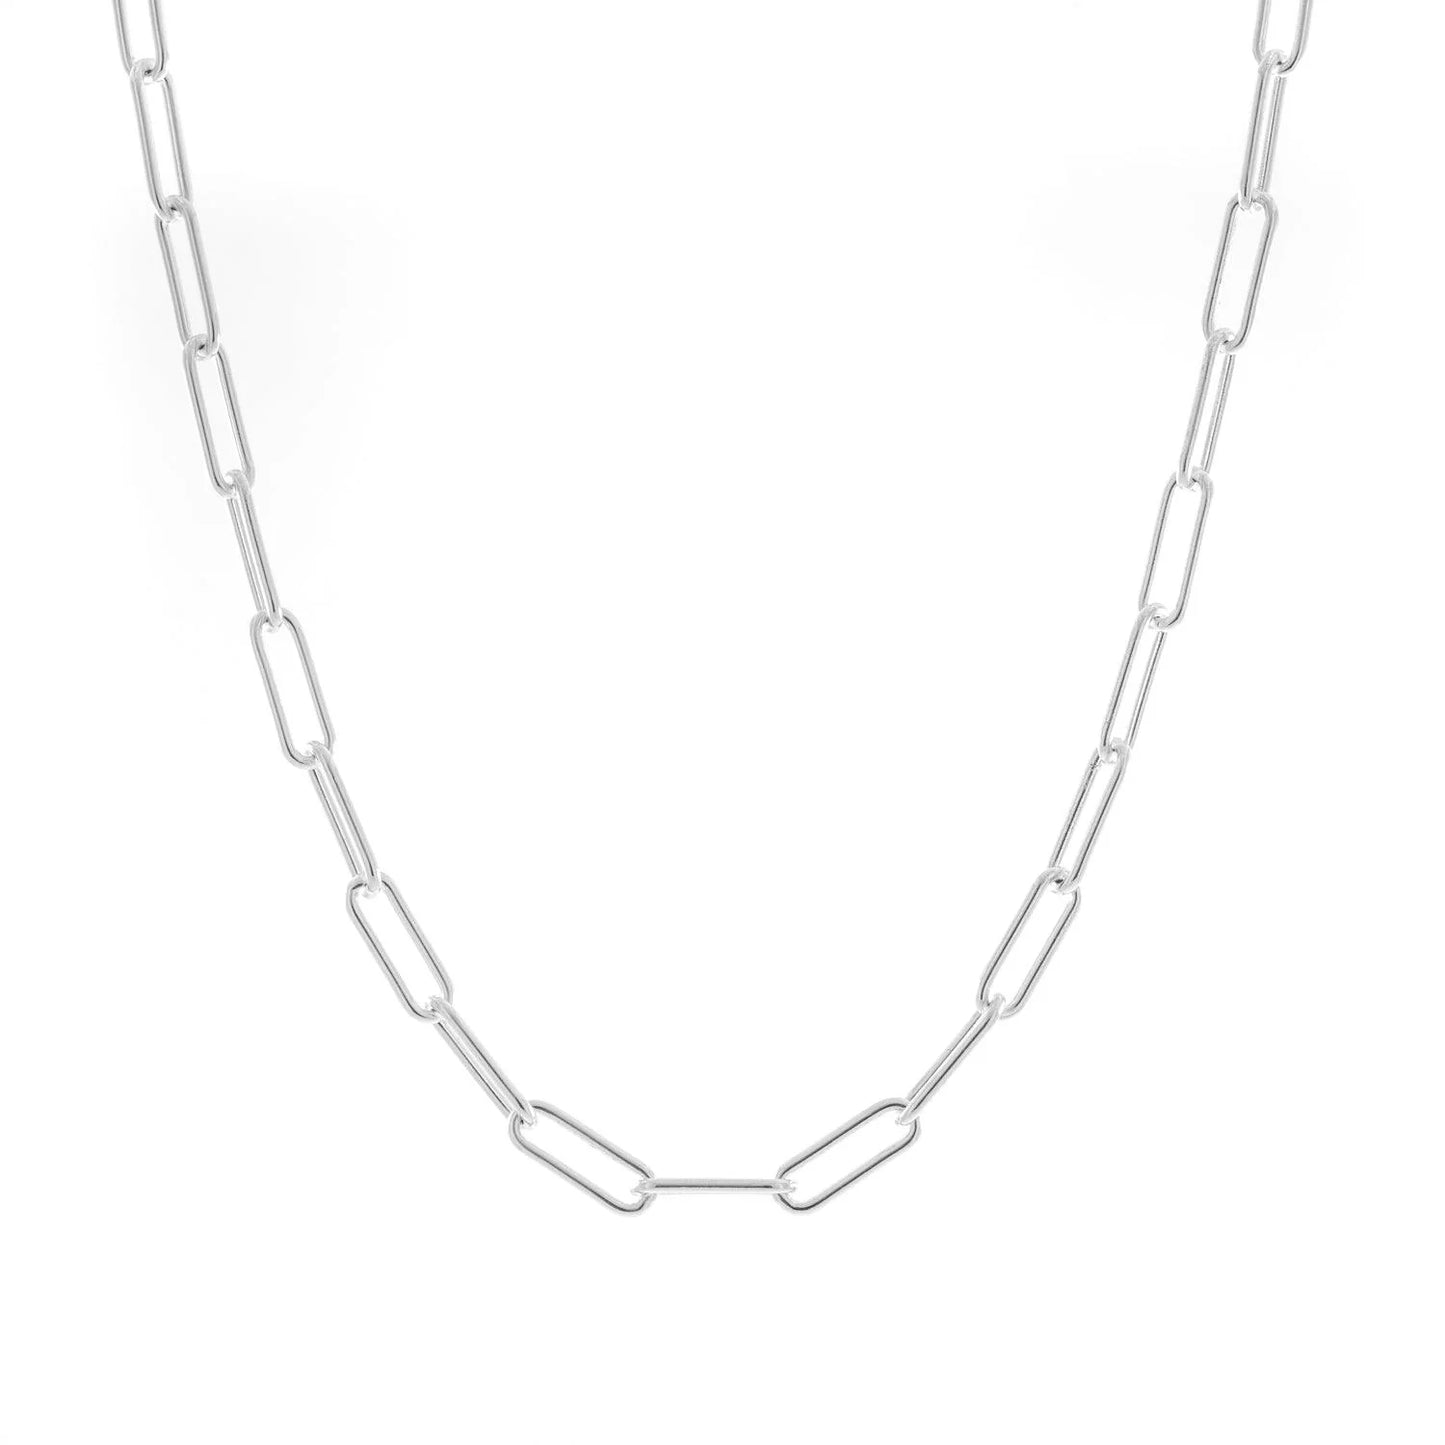 Sterling silver necklace "Amina"